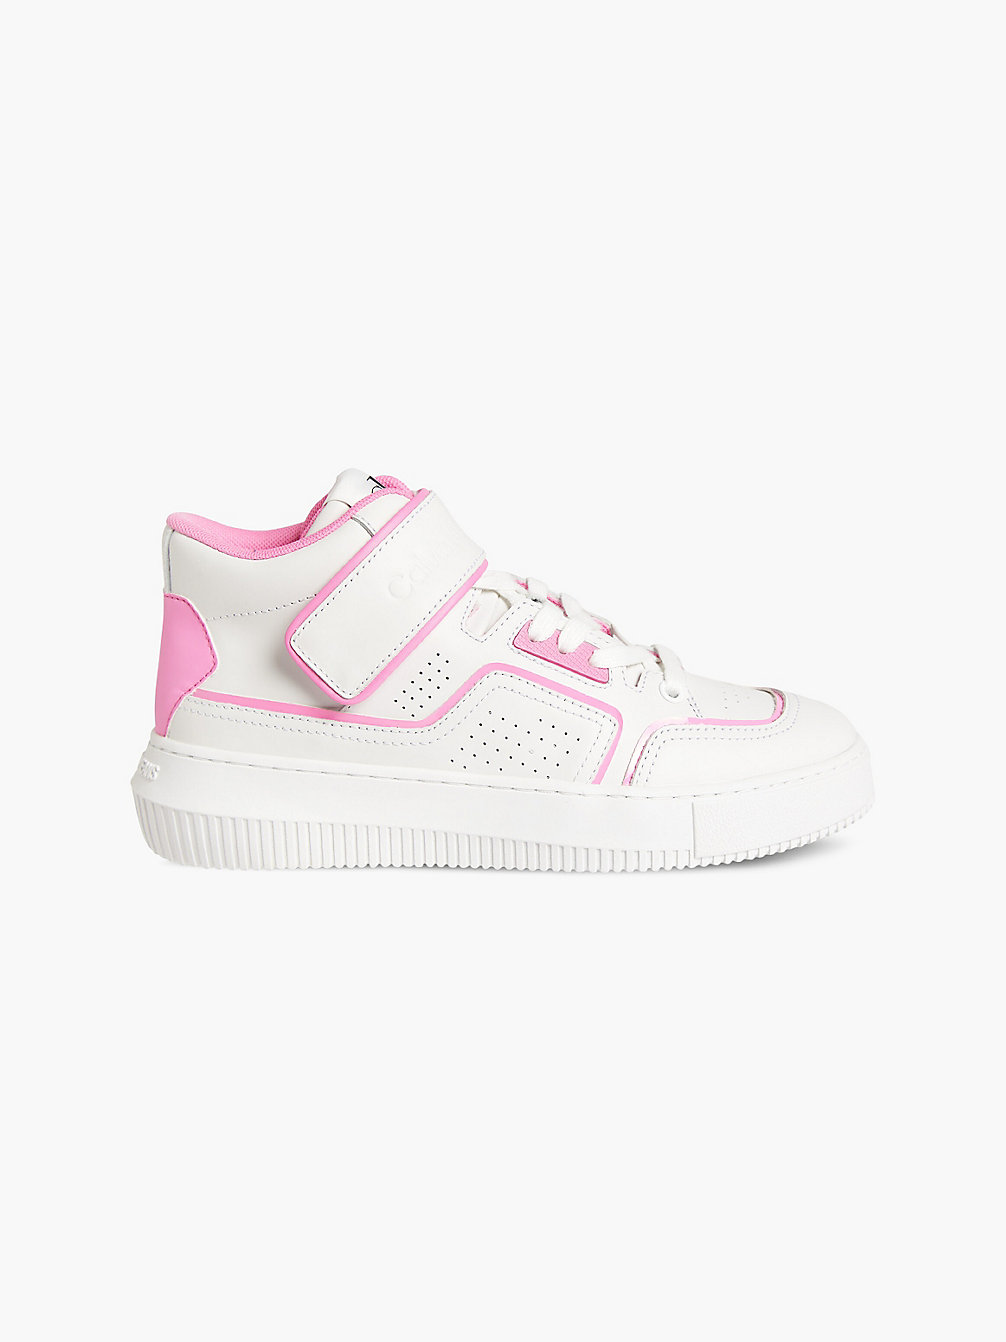 WHITE/NEON PINK Leather High-Top Trainers undefined women Calvin Klein